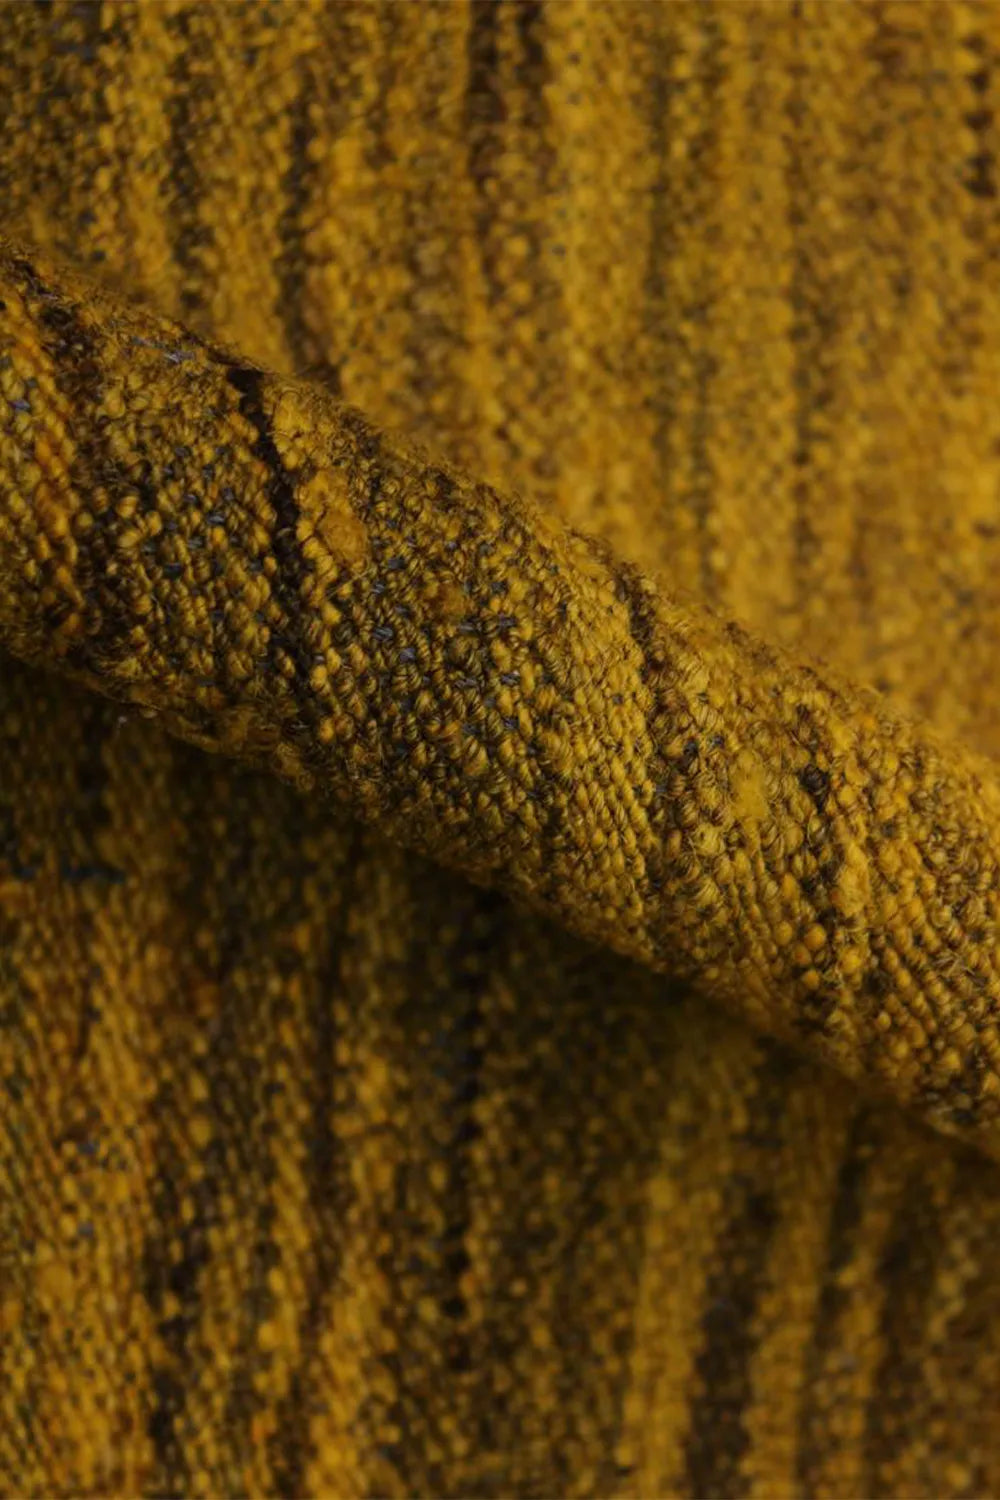 bold statement yellow handwoven area rug, a centerpiece for stylish living spaces